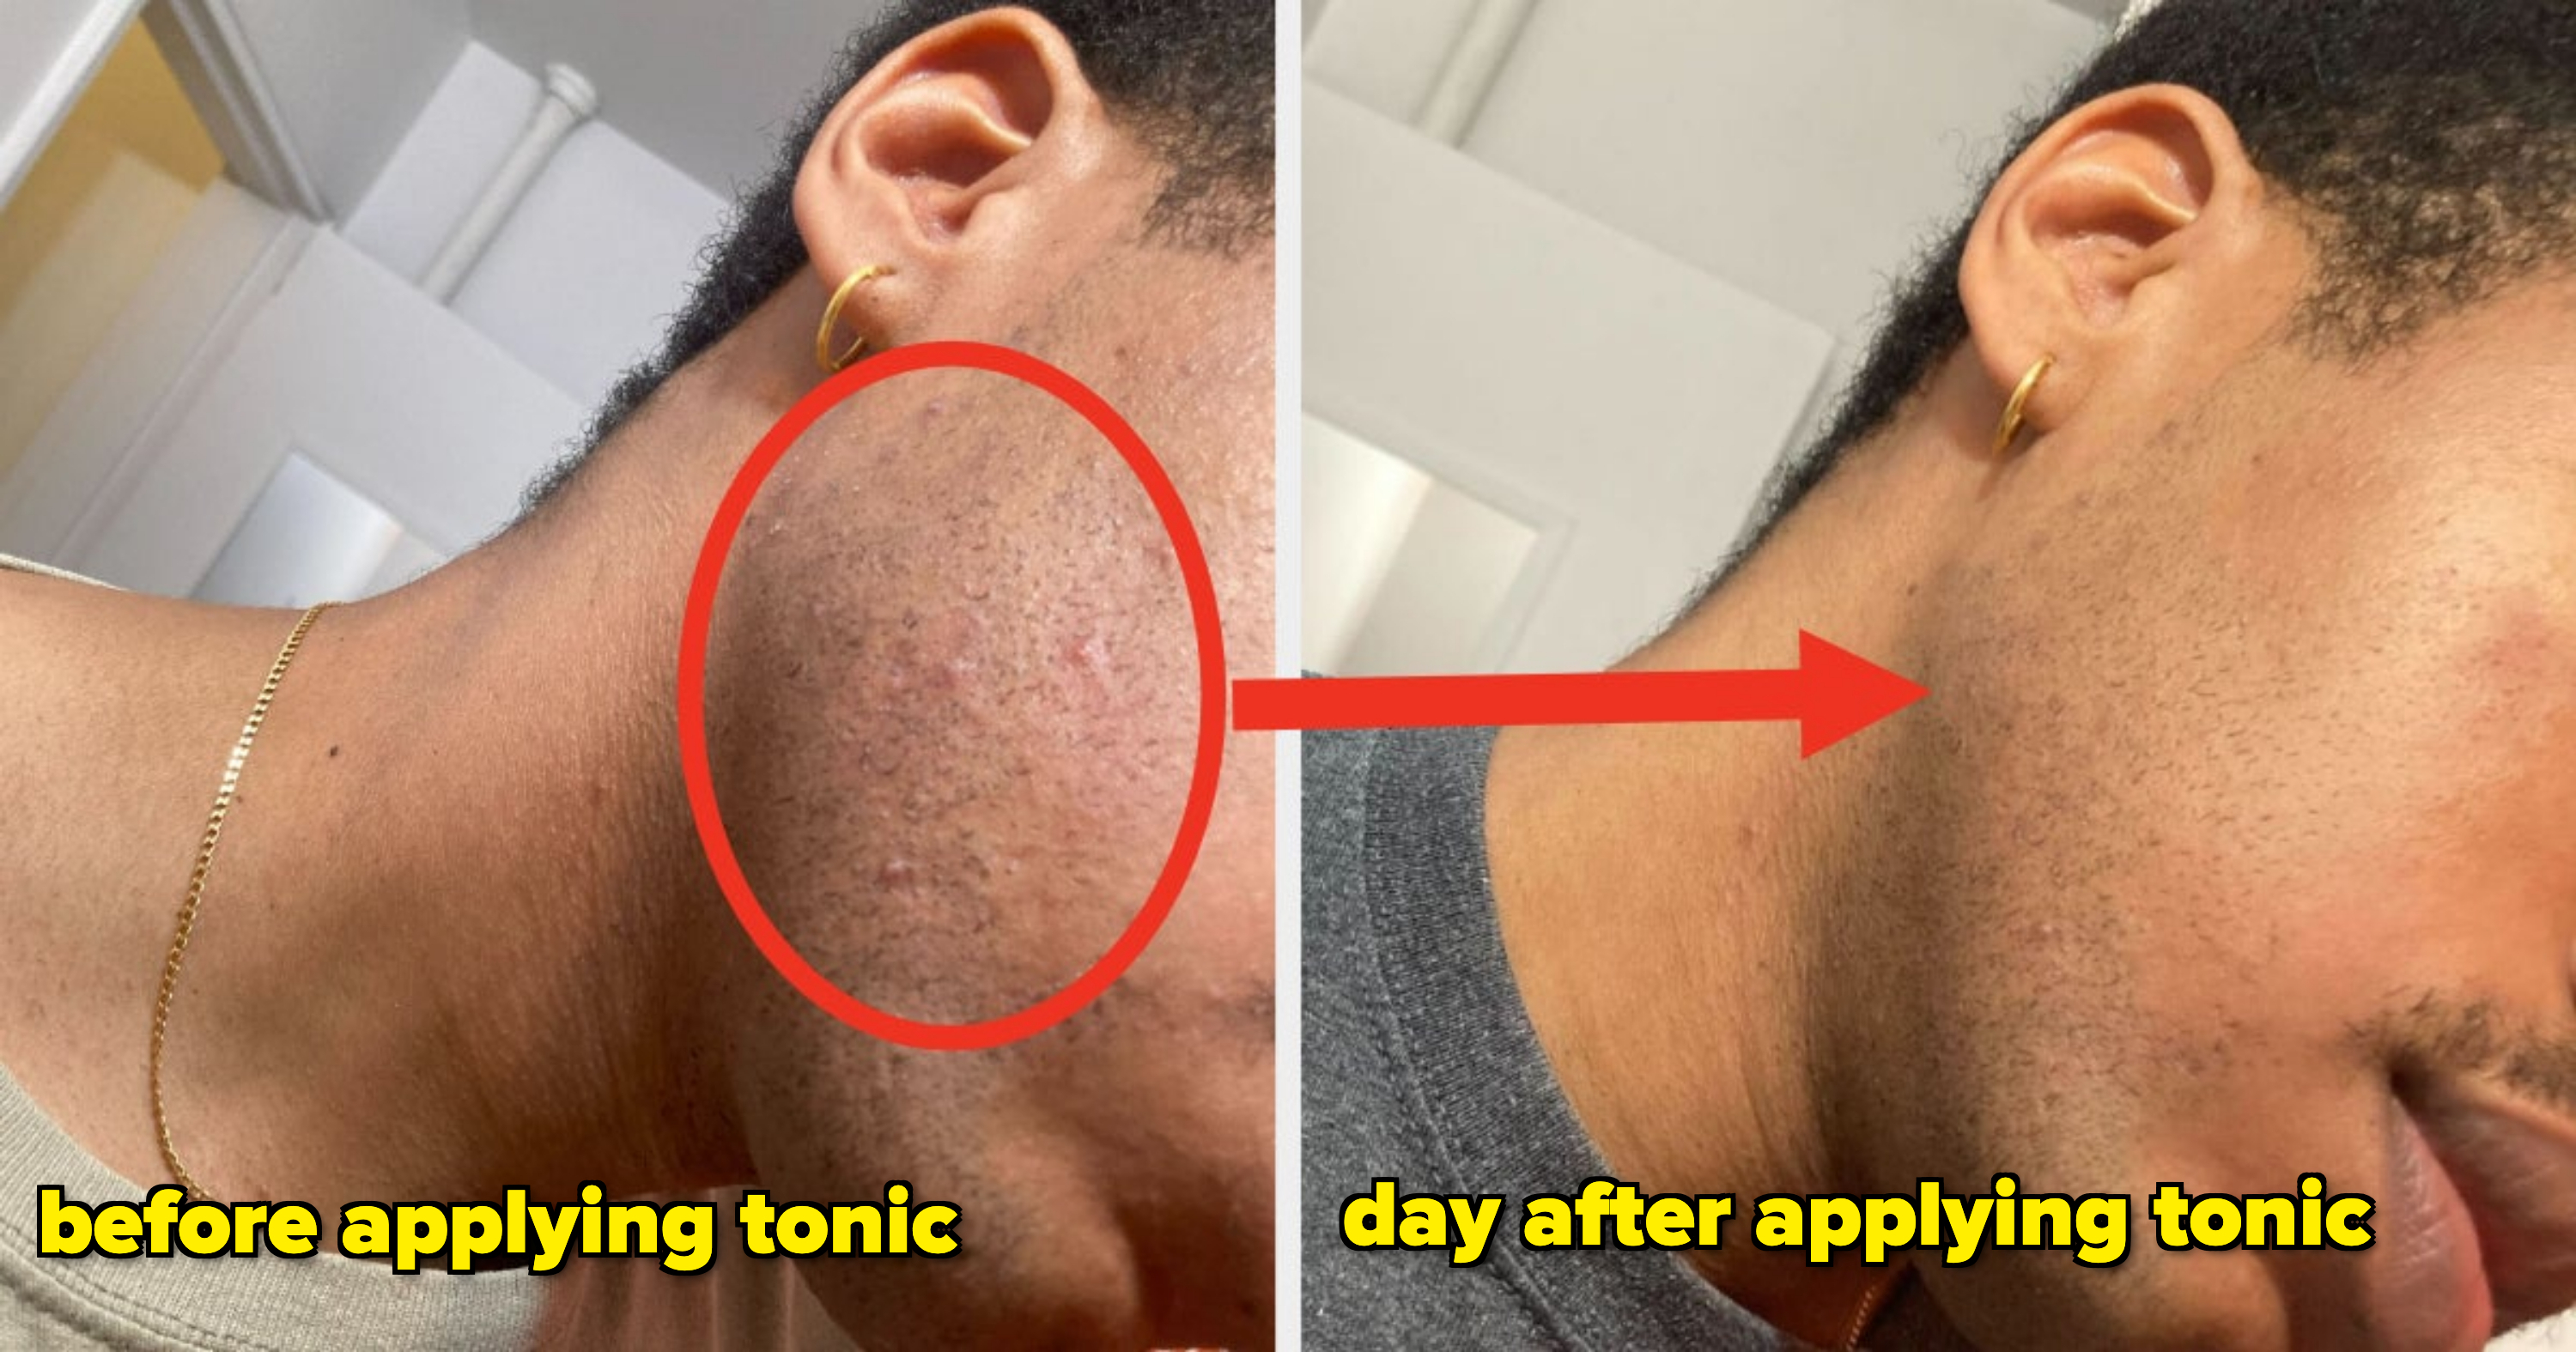 Close-up of a person&#x27;s cheek showing a before image on the left with acne scars circled in red and an after image on the right with clearer skin and an arrow pointing from left to right